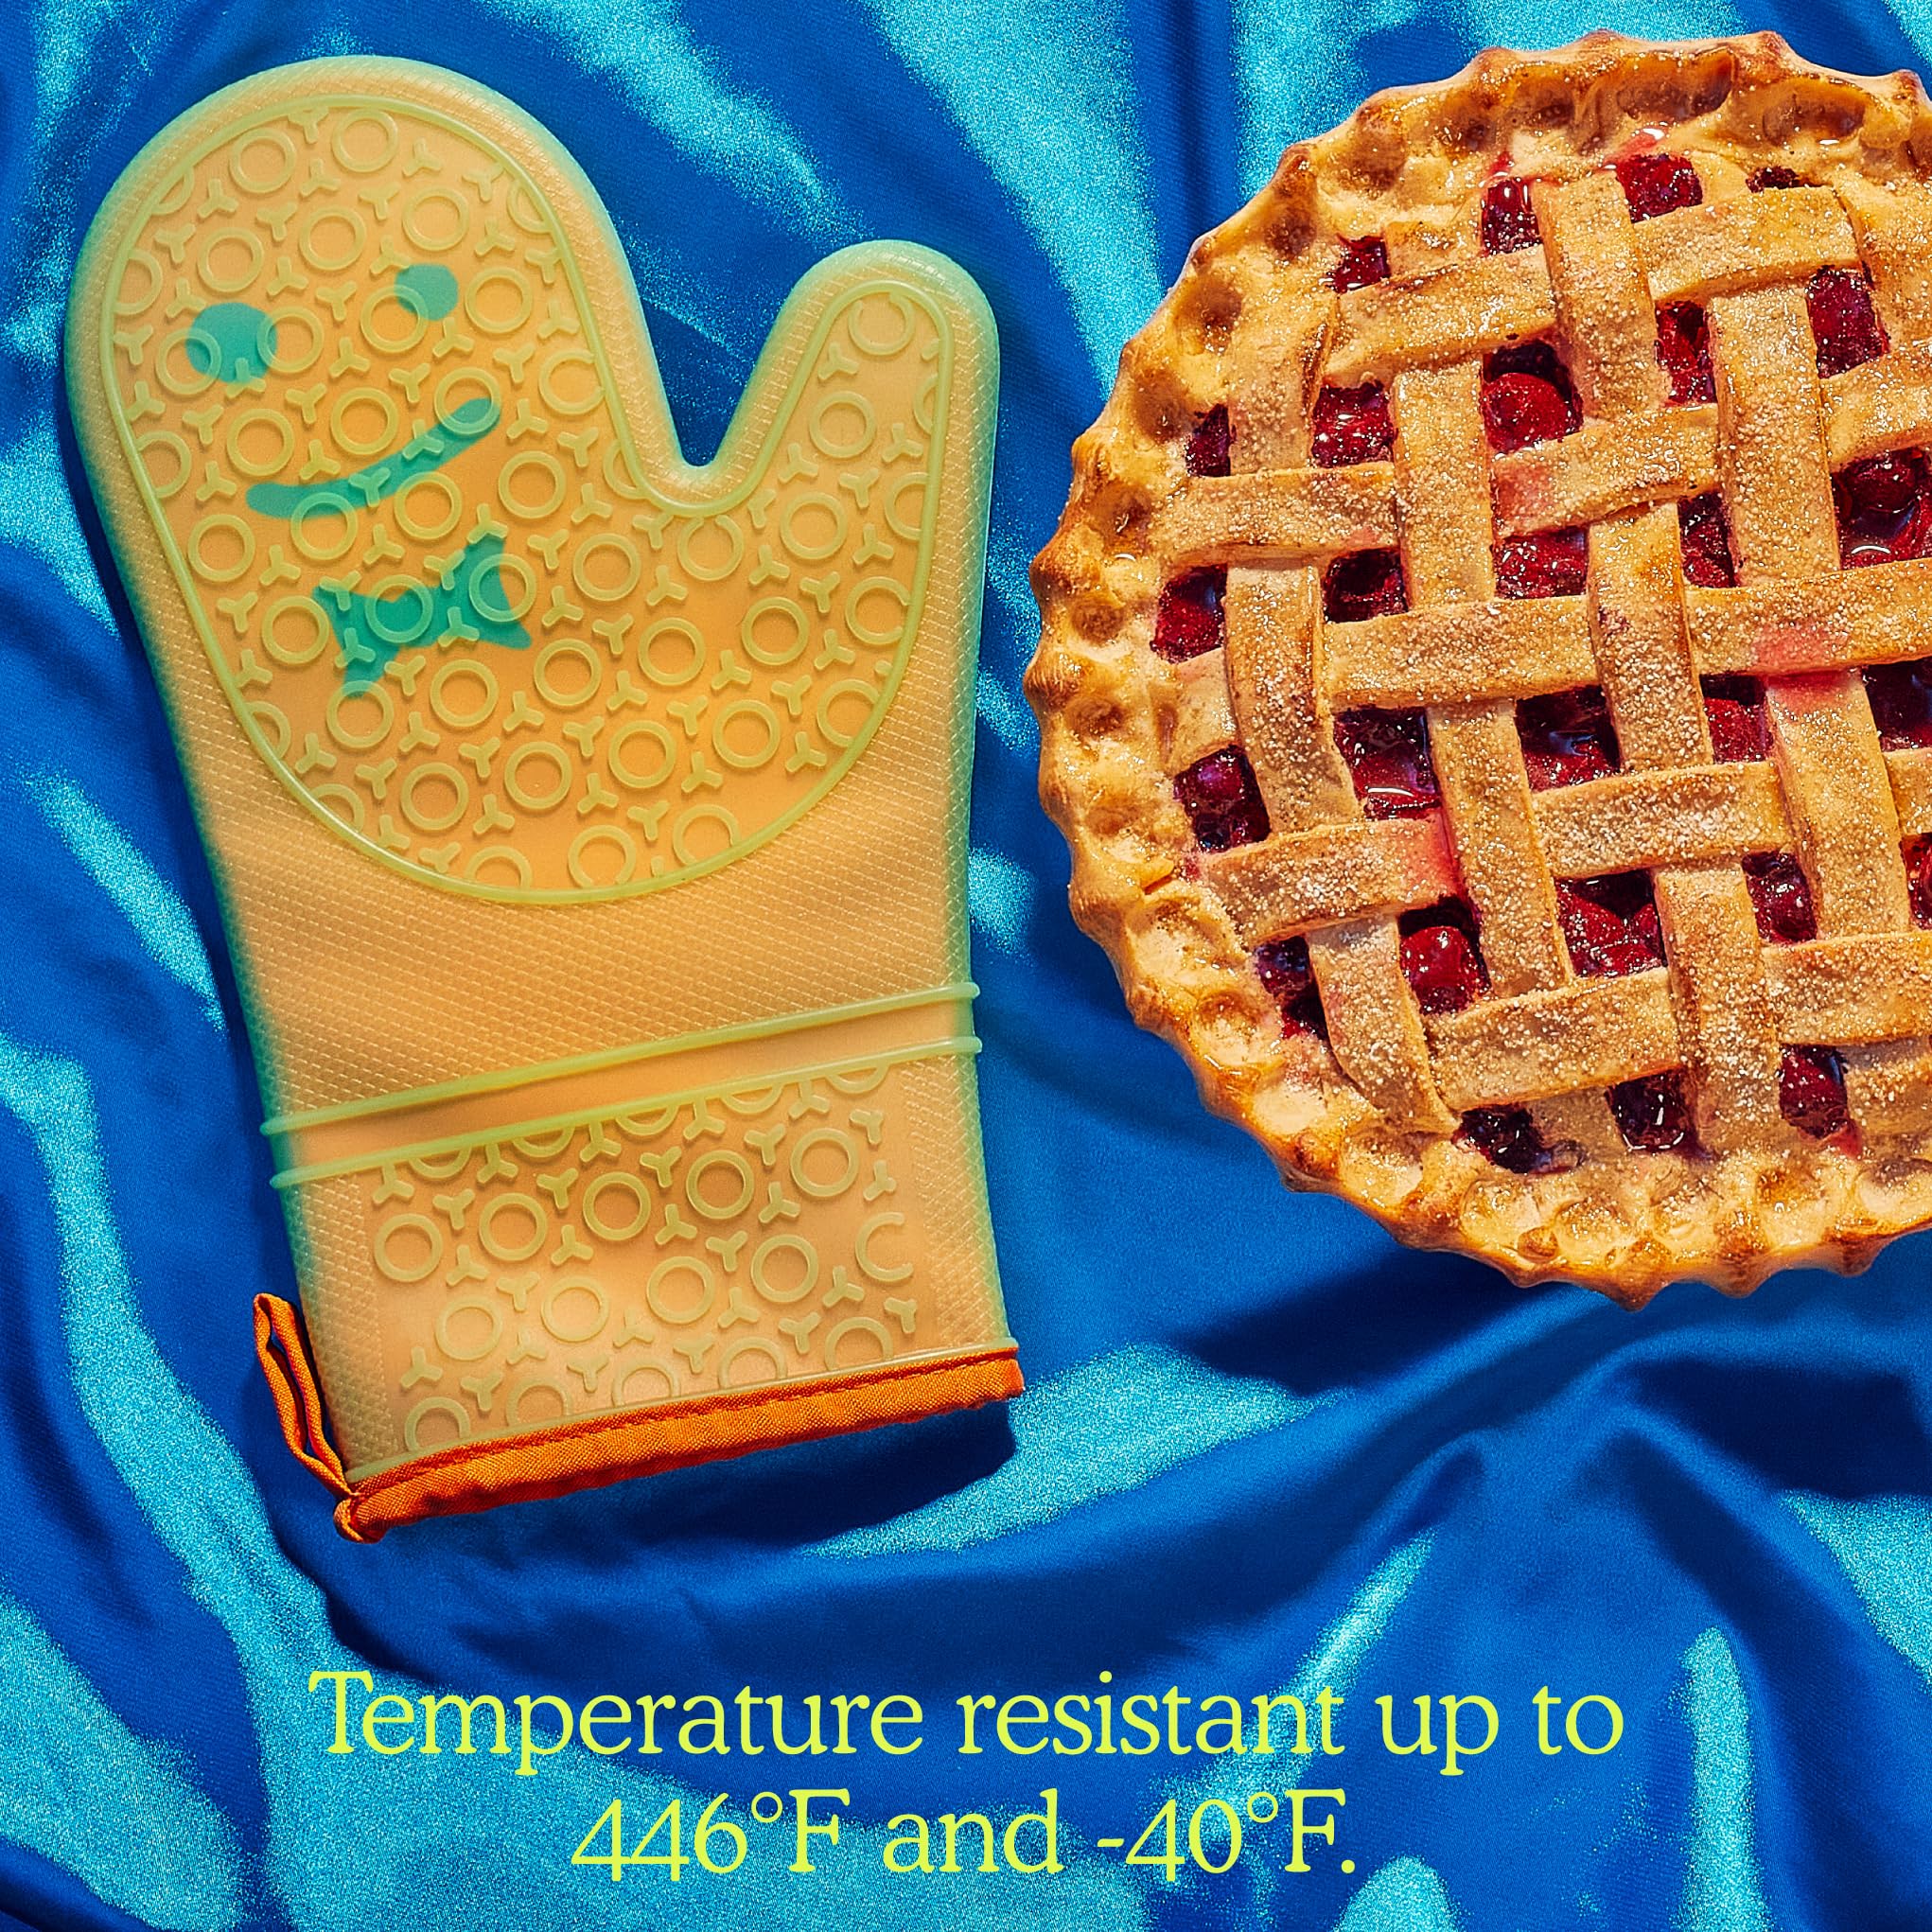 The Oven Mitts by Staff - Pair of Heat Resistant, Grippy Silicone Oven Mitts - Non-Slip, Waterproof, Cotton Fiber Lining - Temperature Resistant (446°F) 11.6" x 7.5" Ideas